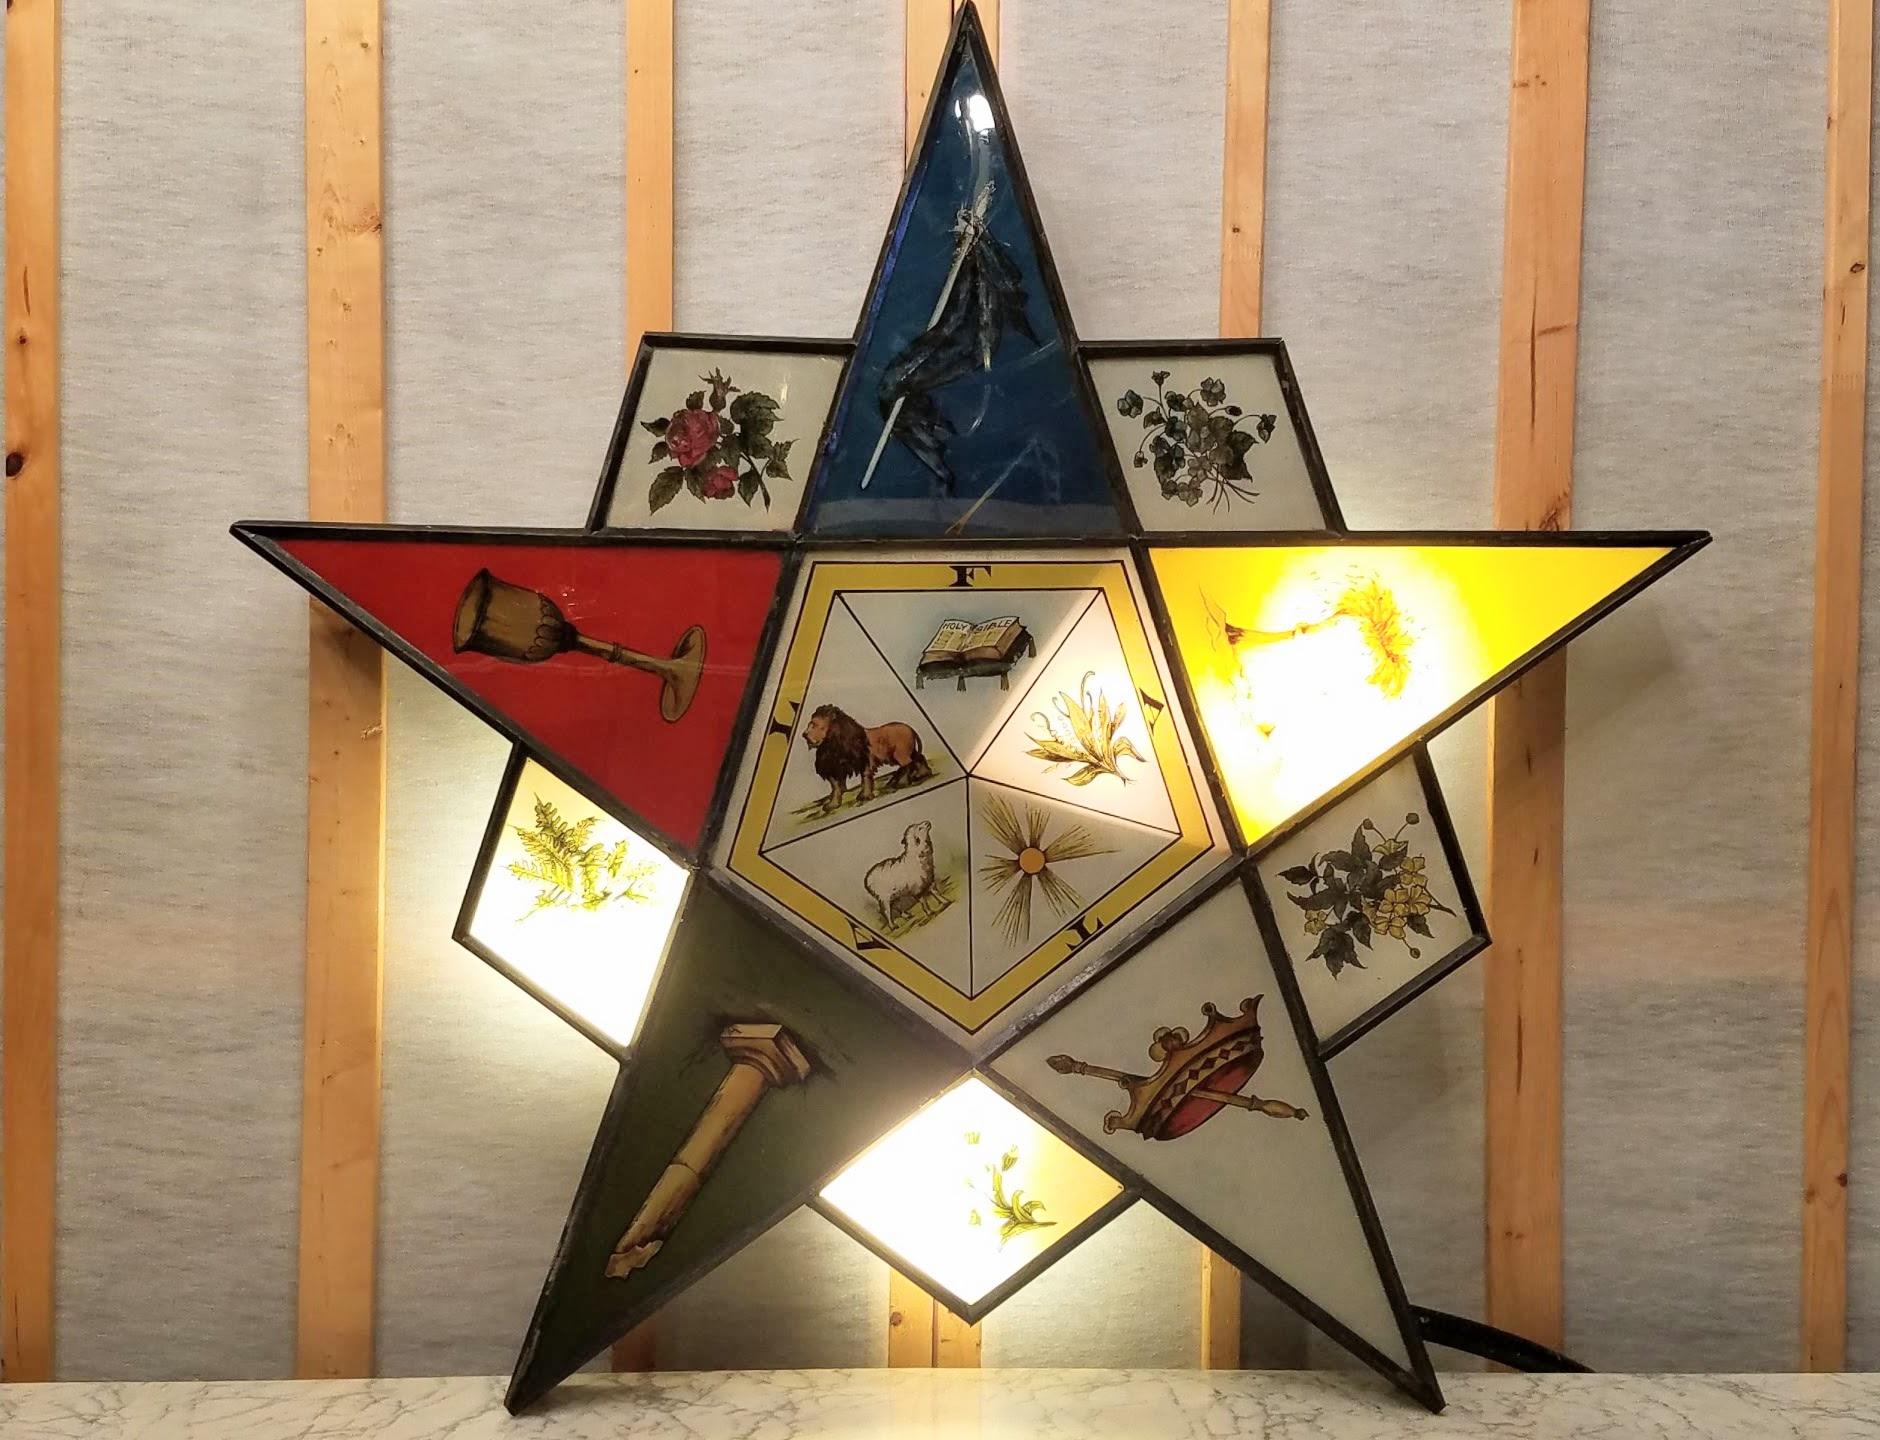 Illuminated tin sign with a reverse painting on glass star for the Eastern Star of the Masonic Temple from the 1920s..
The sign is shown mounted on its original metal pipe tripod that rolls on wooden wheels and unmounted ready to hang on a wall.
The